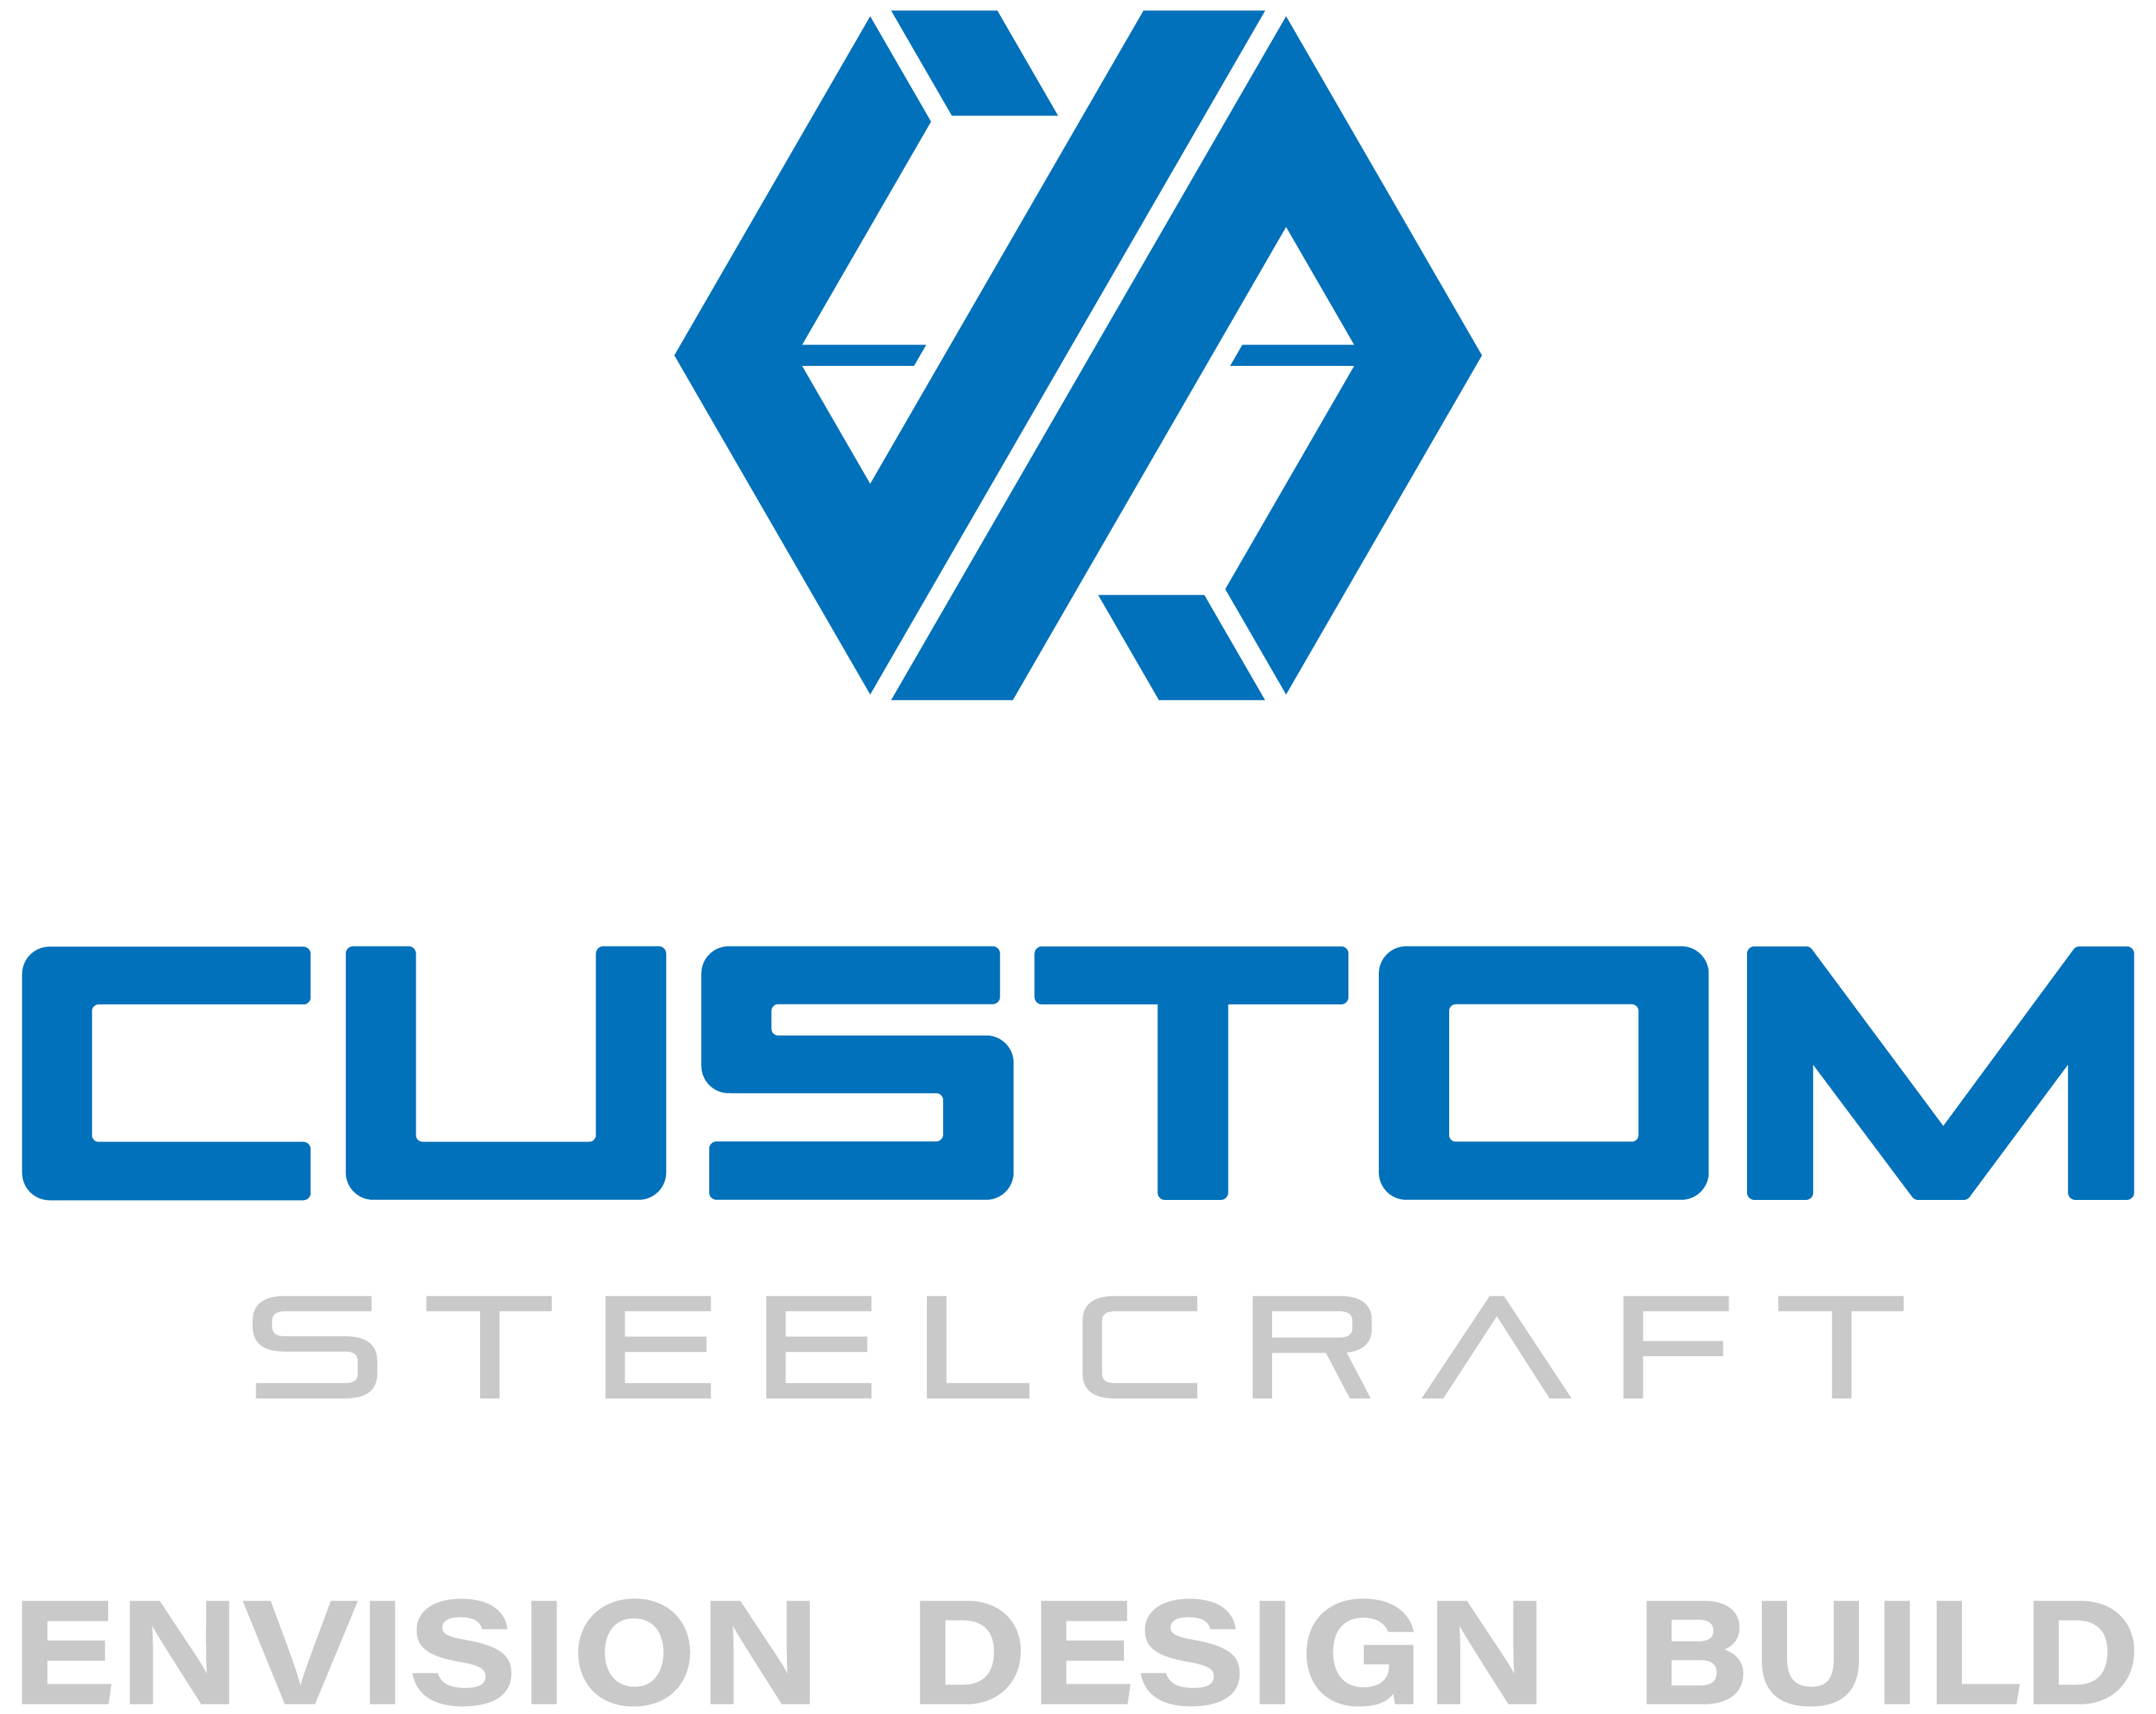 custom steelcraft logo, scroll down to get to the site navigation